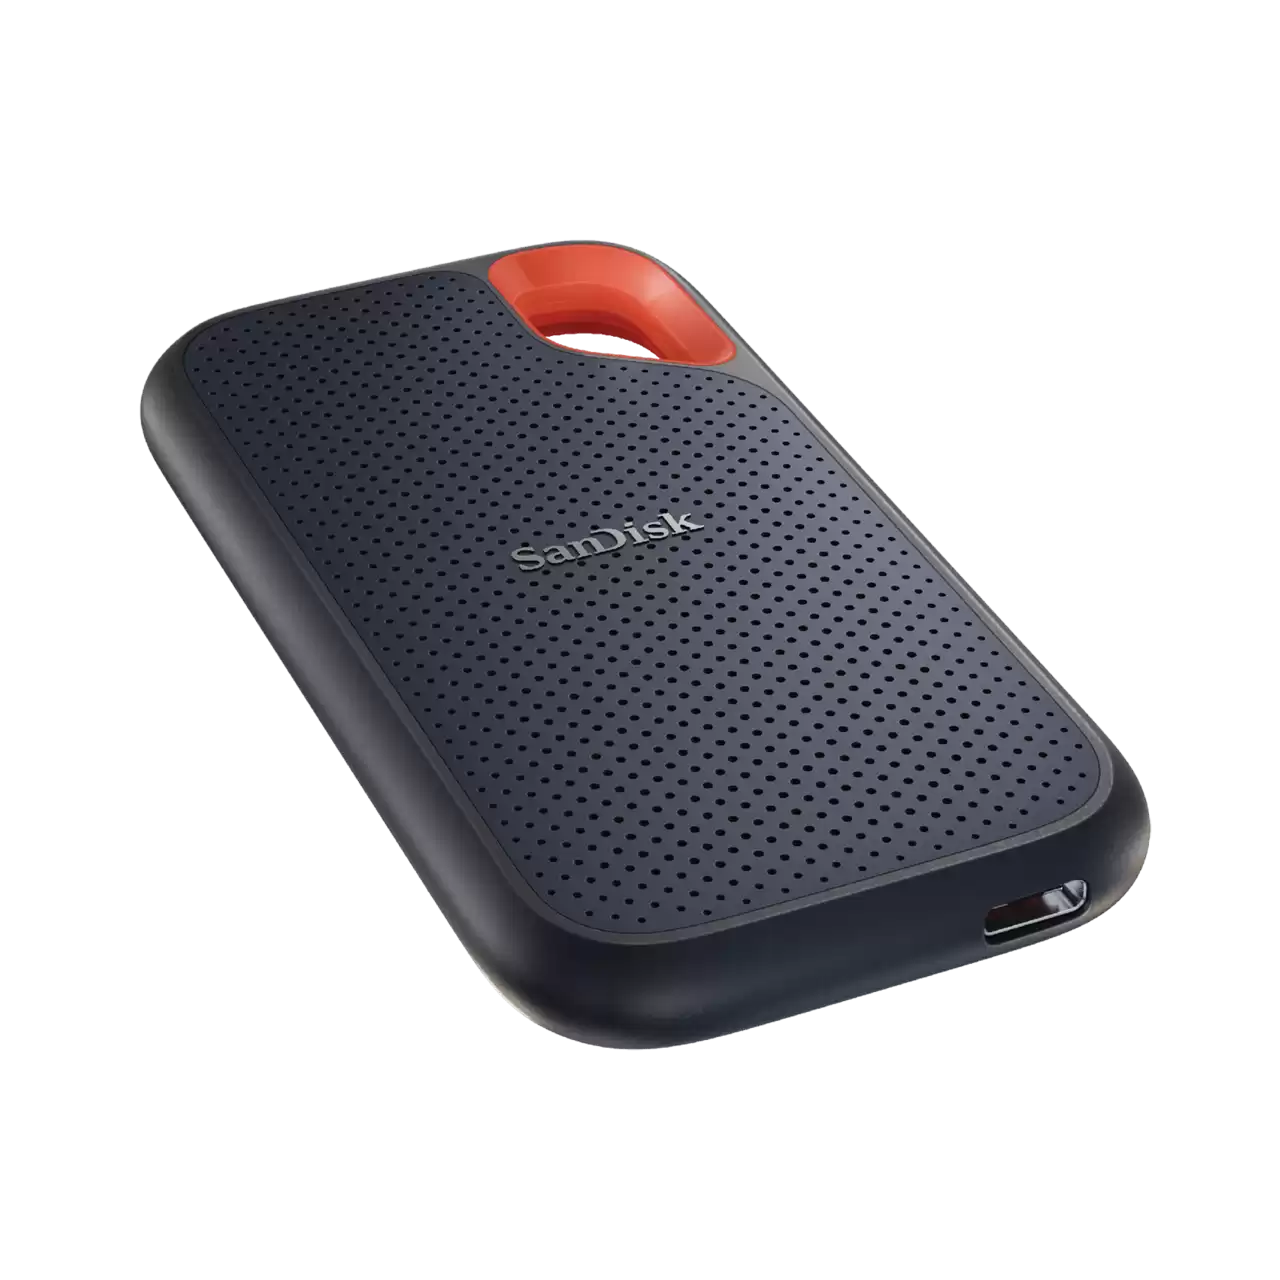 SanDisk Extreme Portable SSD 1050MB/s